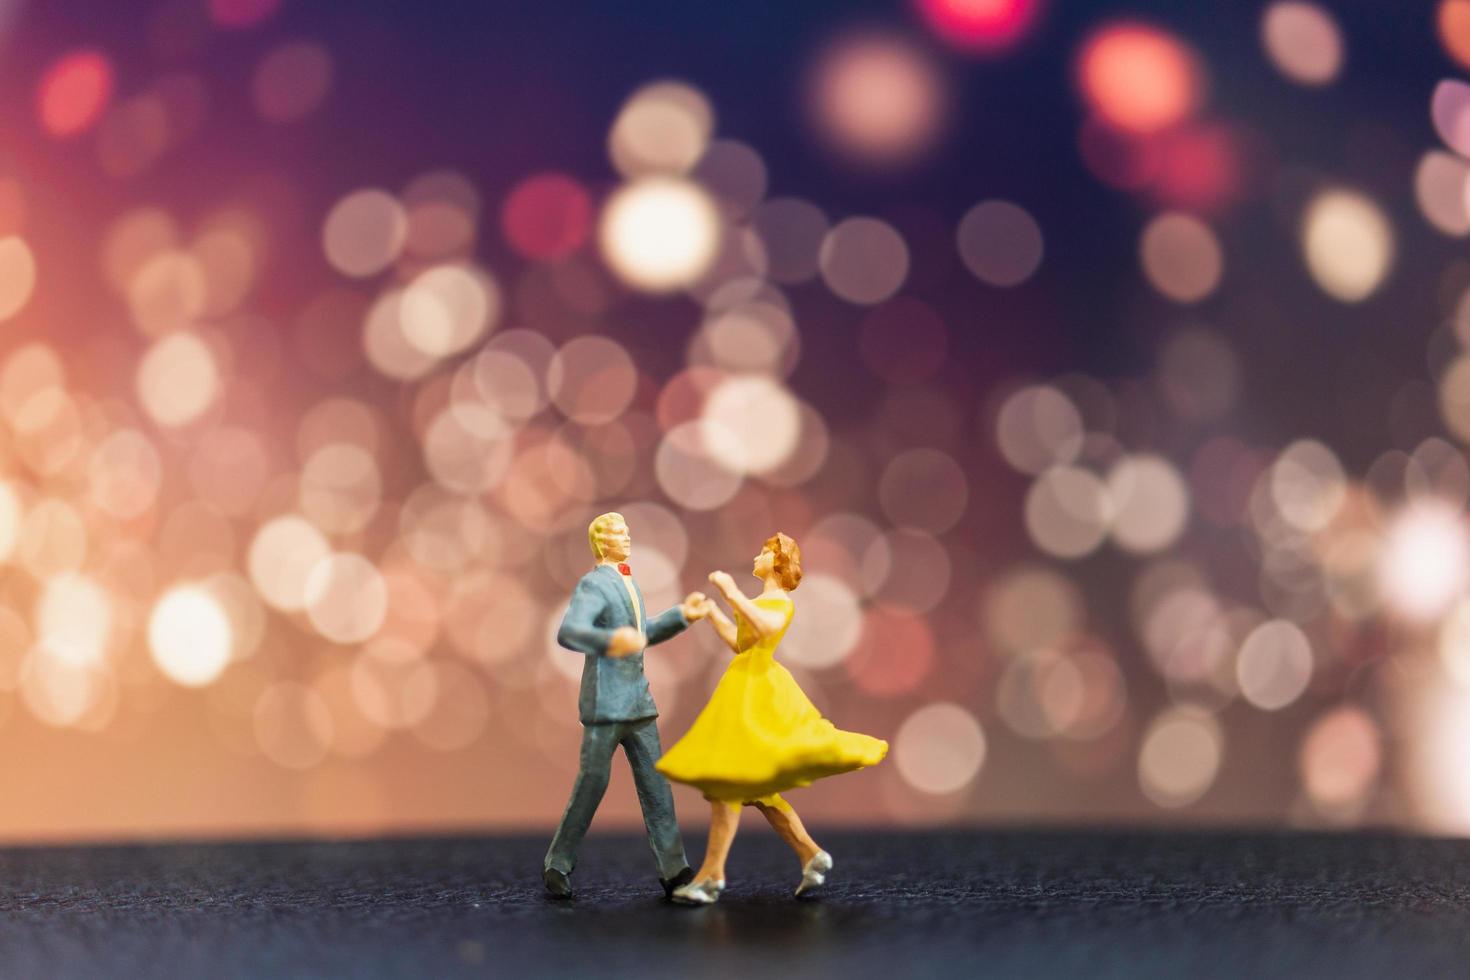 Miniature couple dancing with a bokeh background, Valentine's Day concept photo